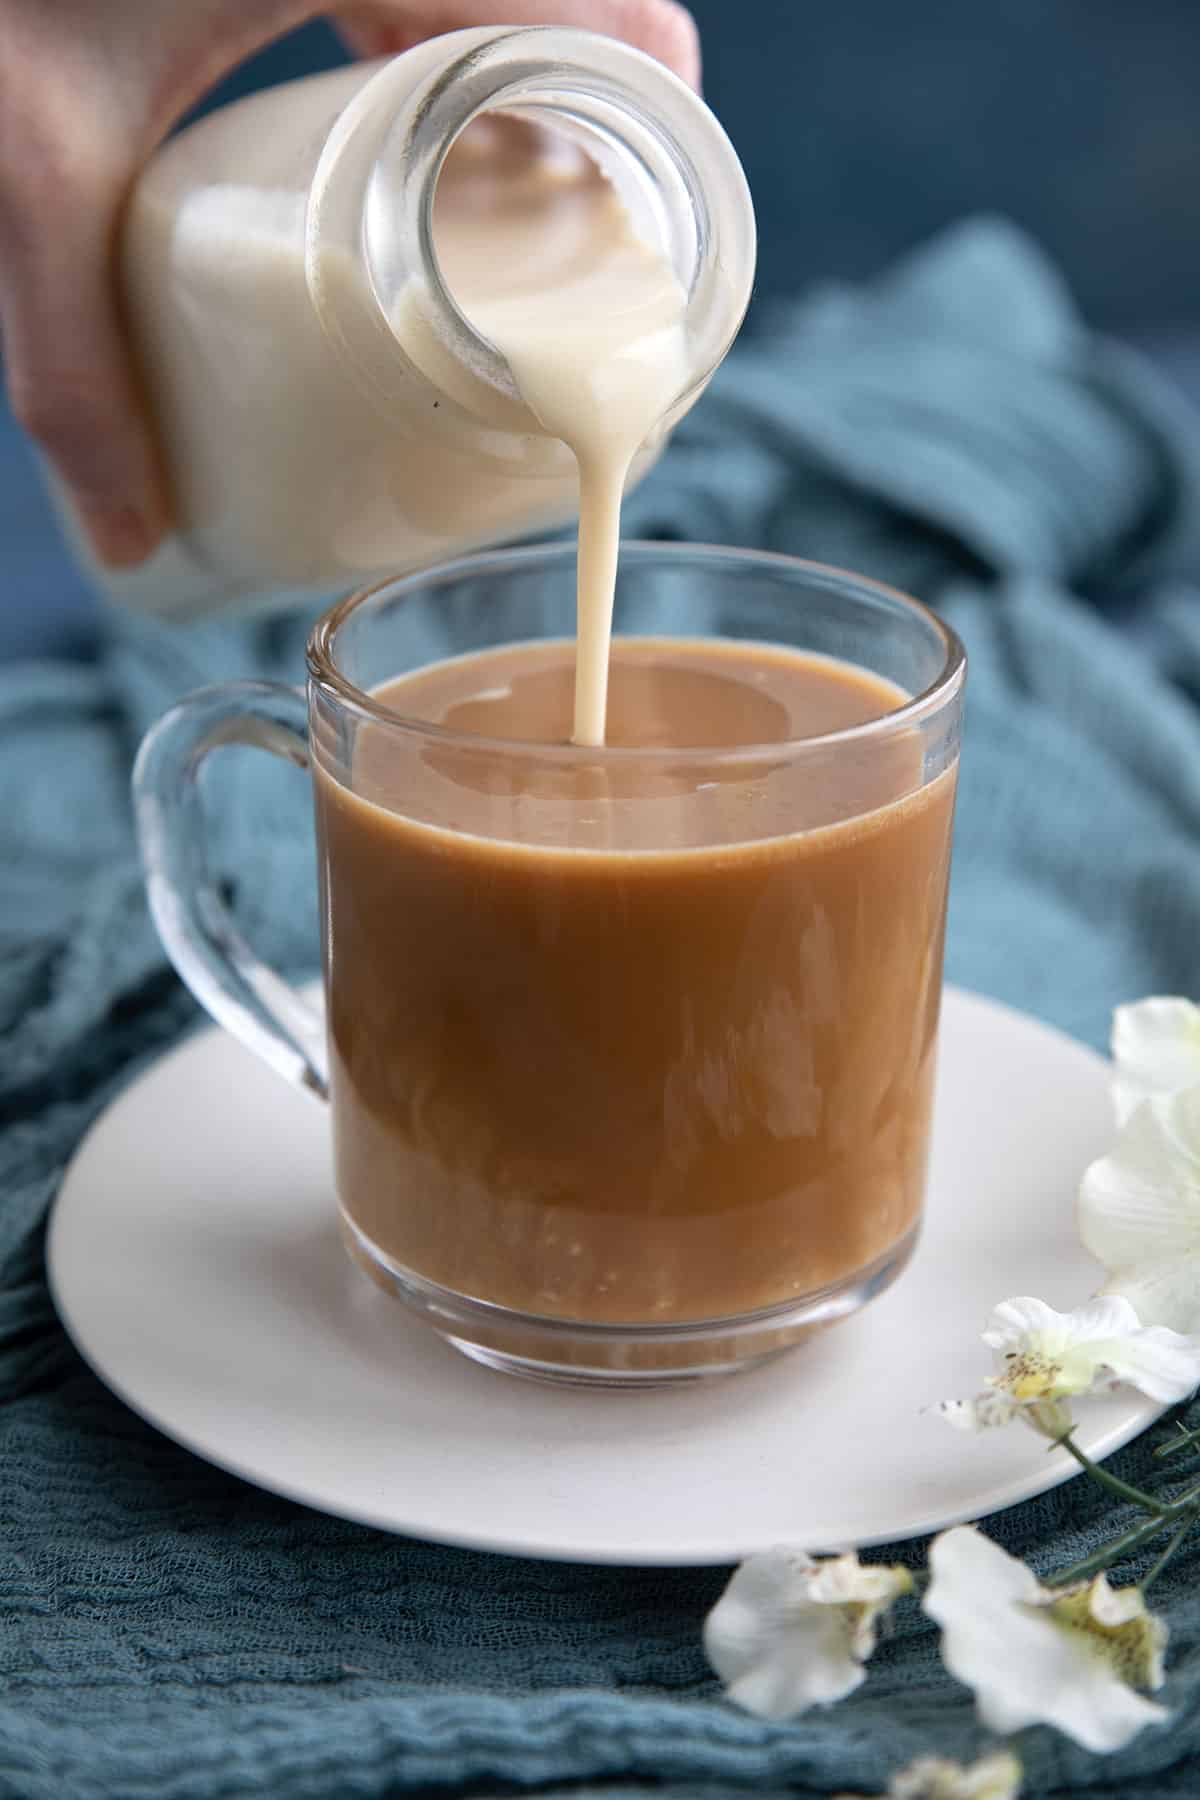 Pouring keto coffee creamer from the bottle into a cup of coffee.